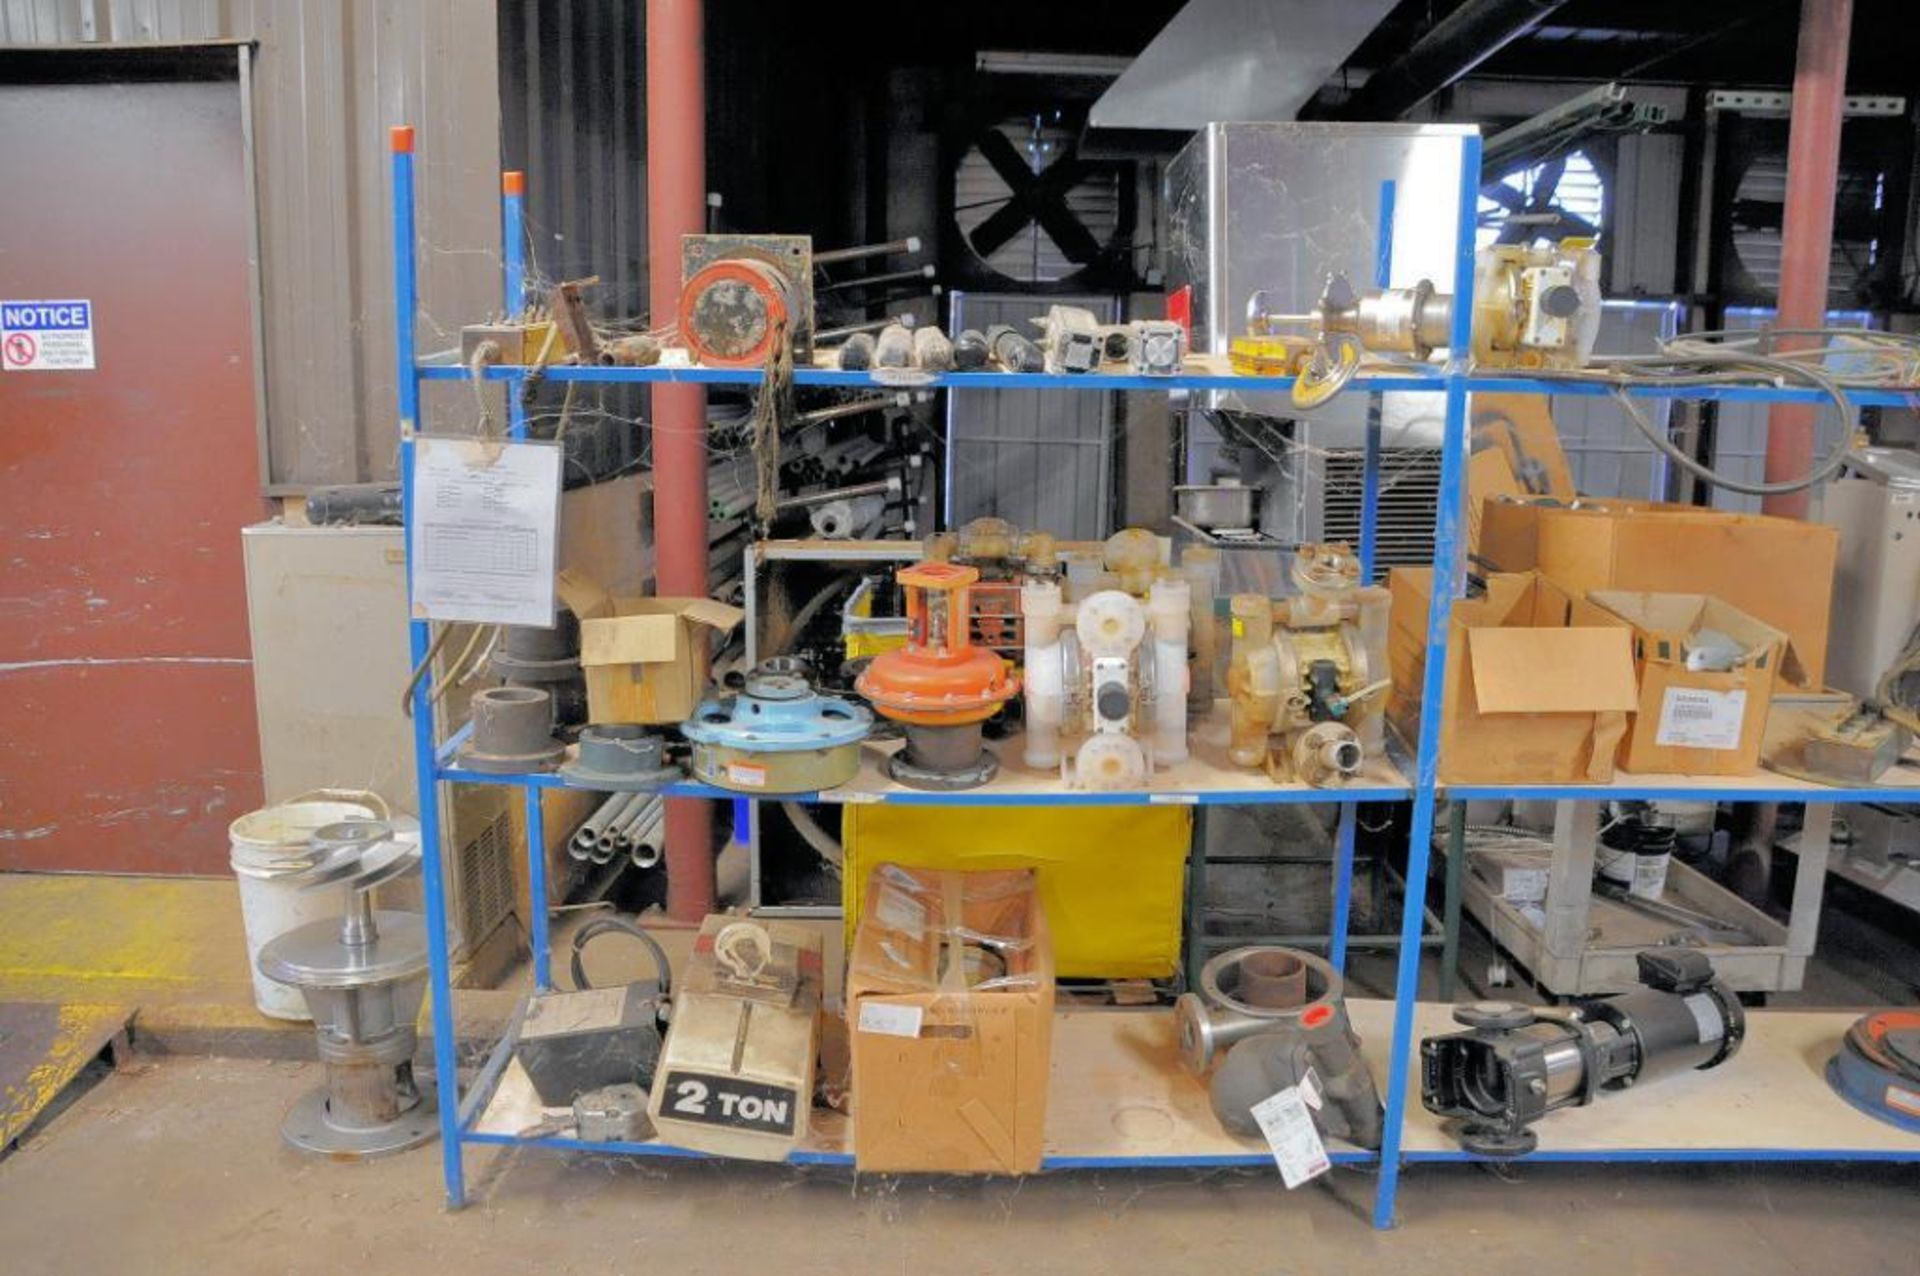 Lot - Pumps, Diaphragm Pumps, Motors, Ice Machine, Drinking Fountain, Pipe Clamps and Exhaust Fan - Image 2 of 5